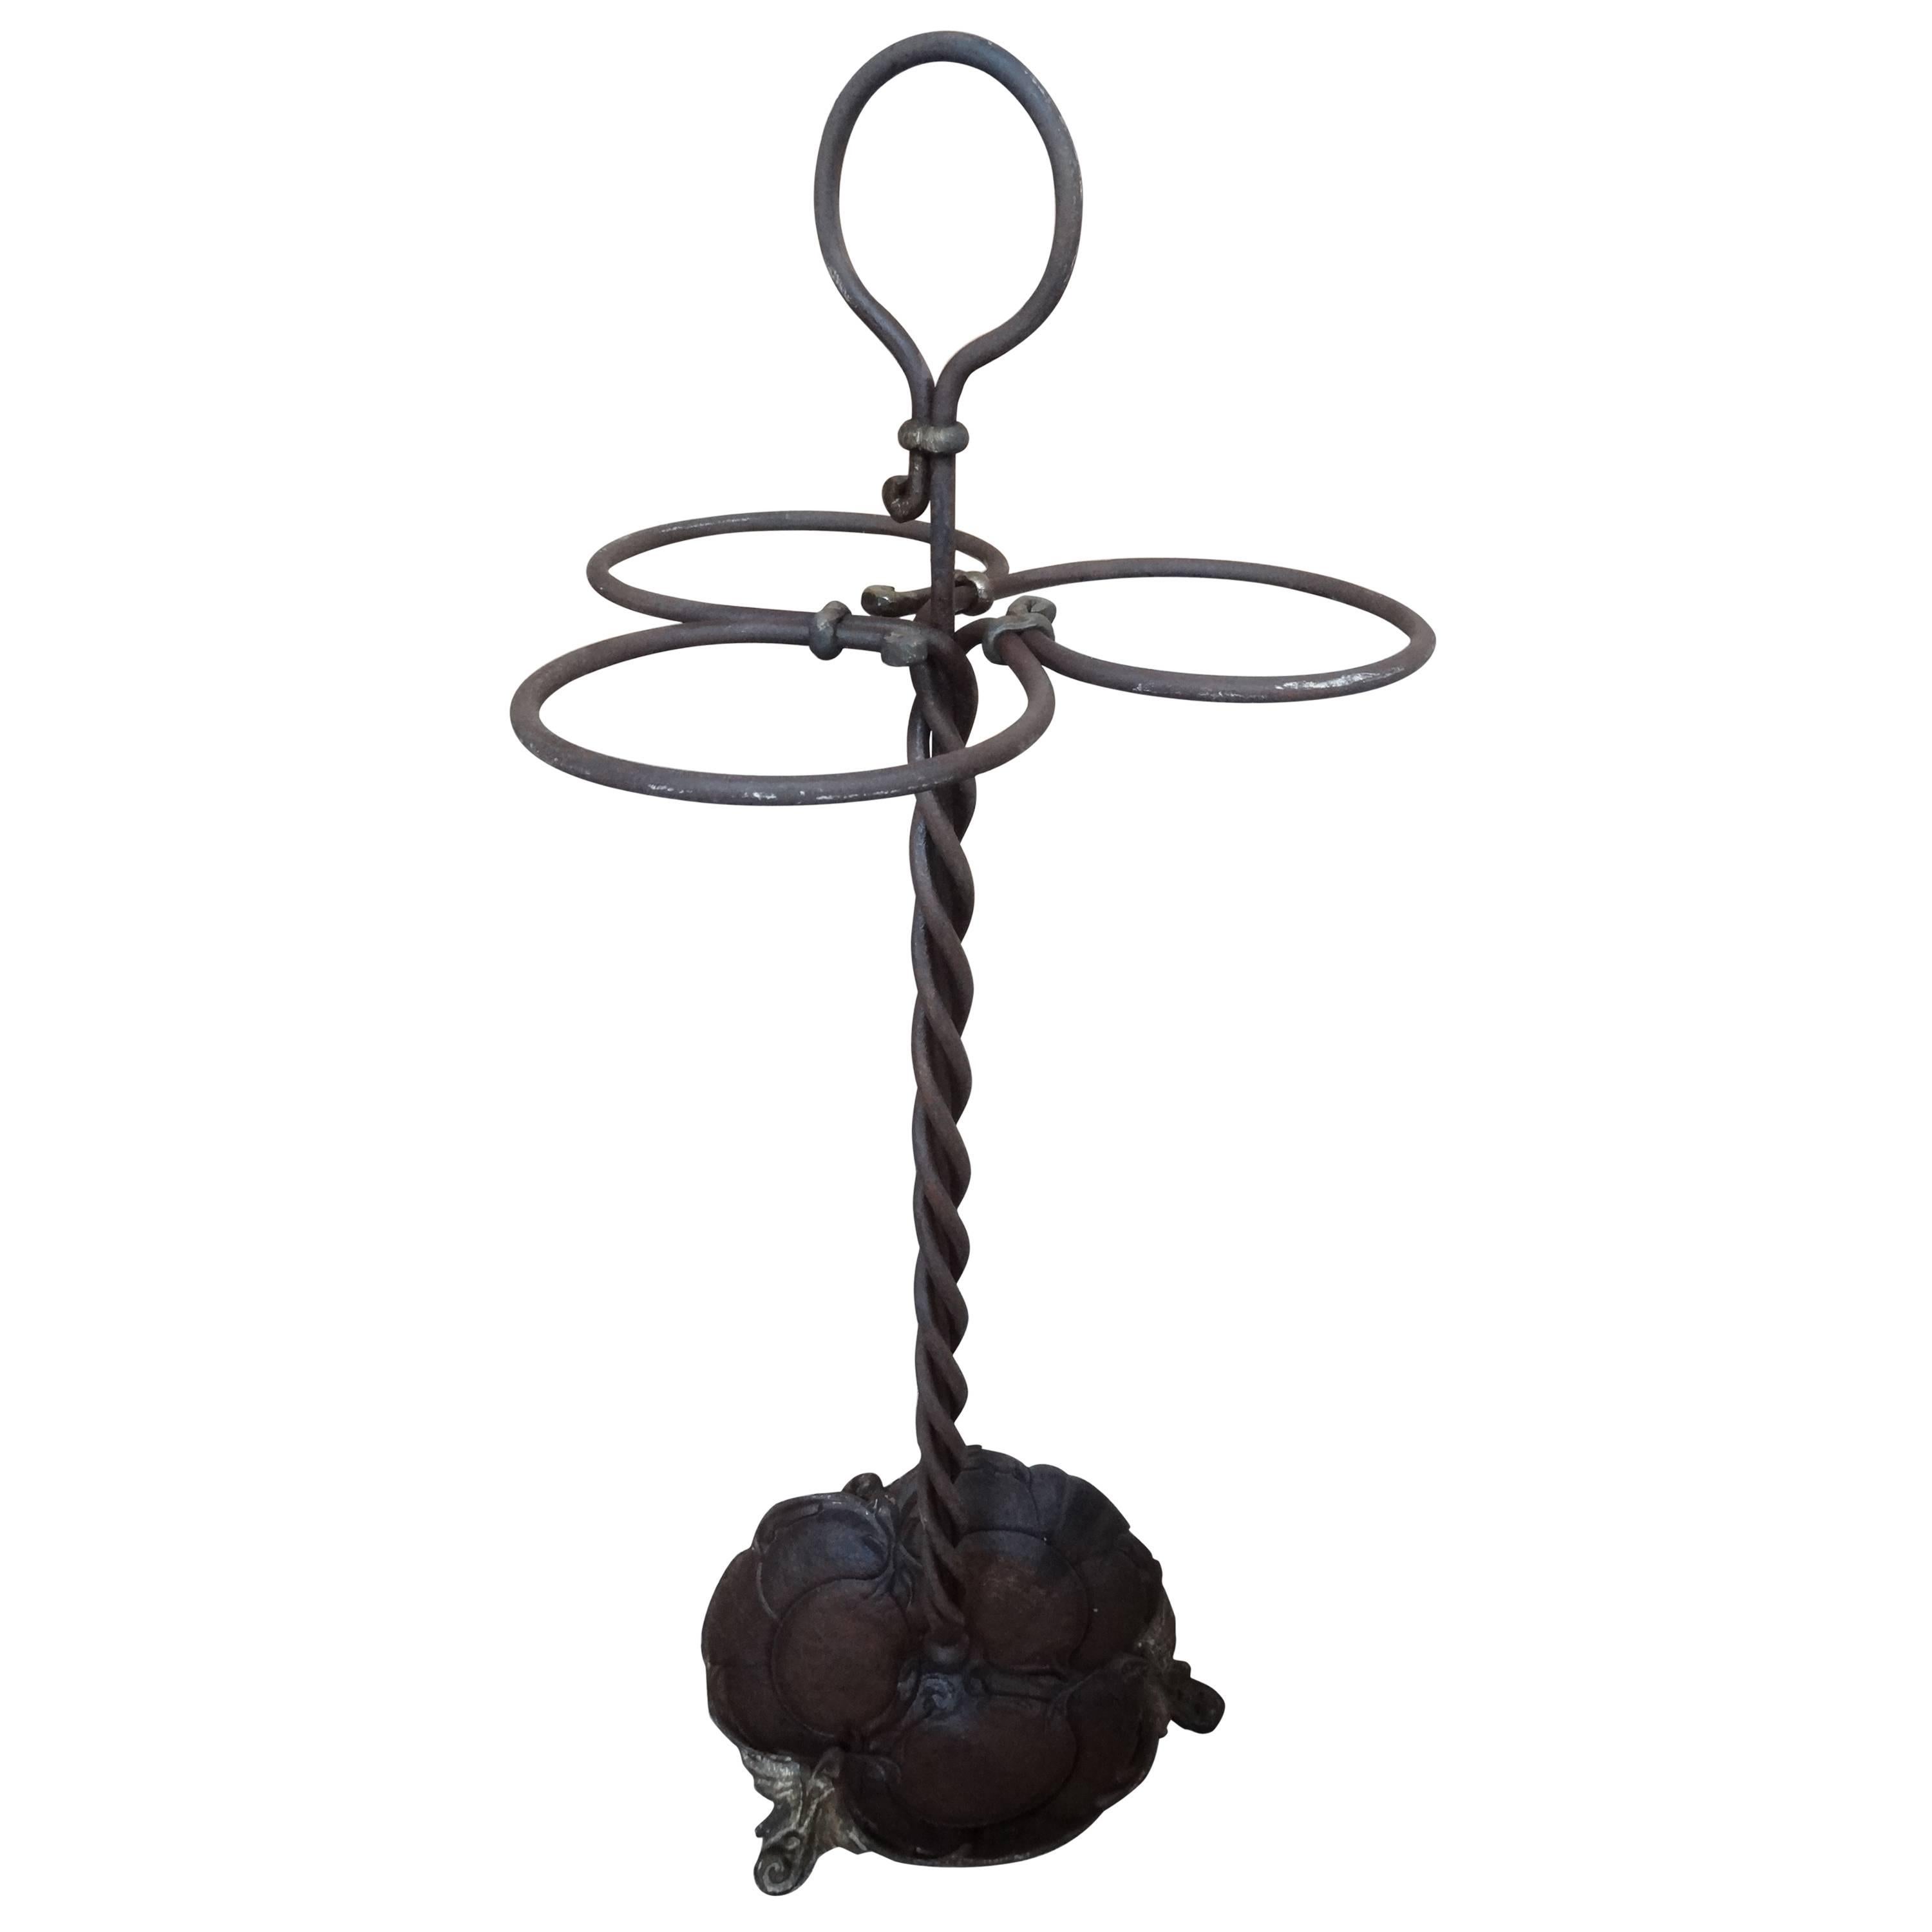 Sought After circa 1880 Vintage French Wrought Iron Umbrella Stand